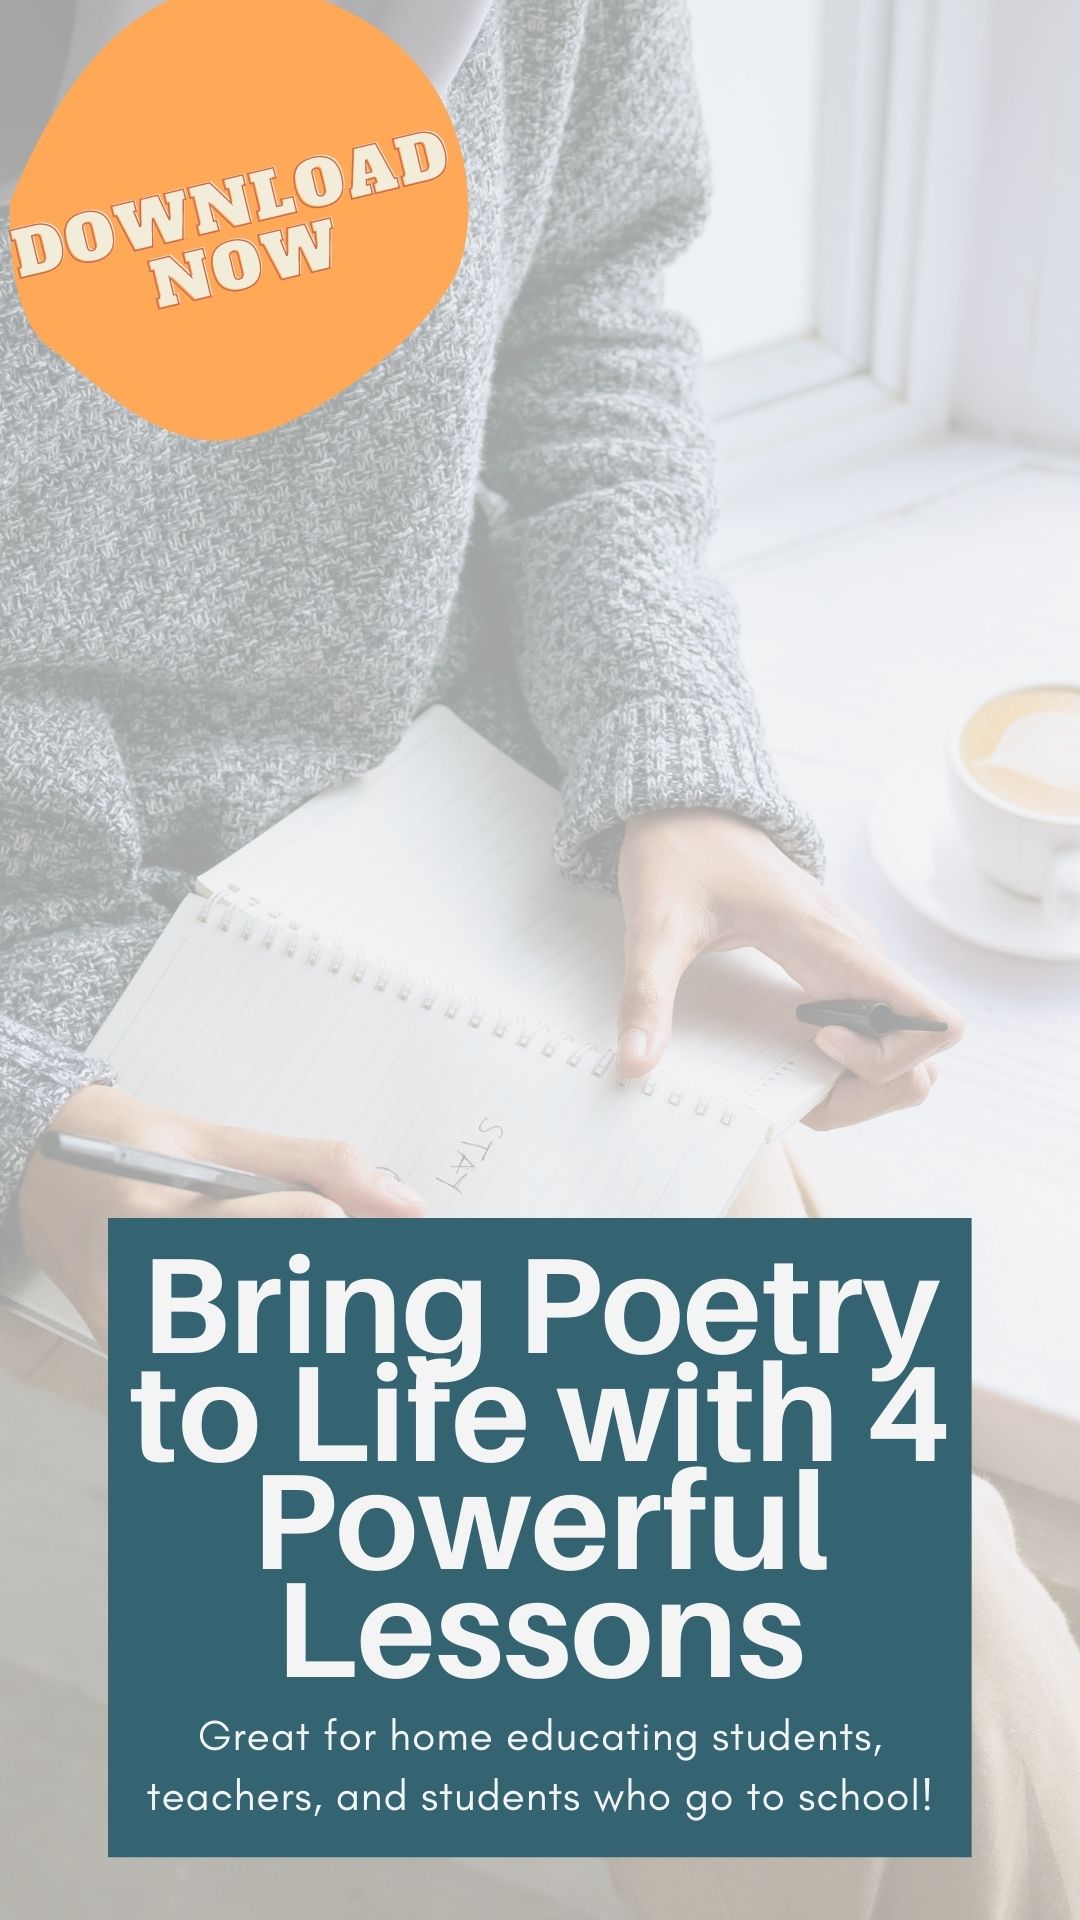 How To Introduce Poetry: Build a Love of Poetry